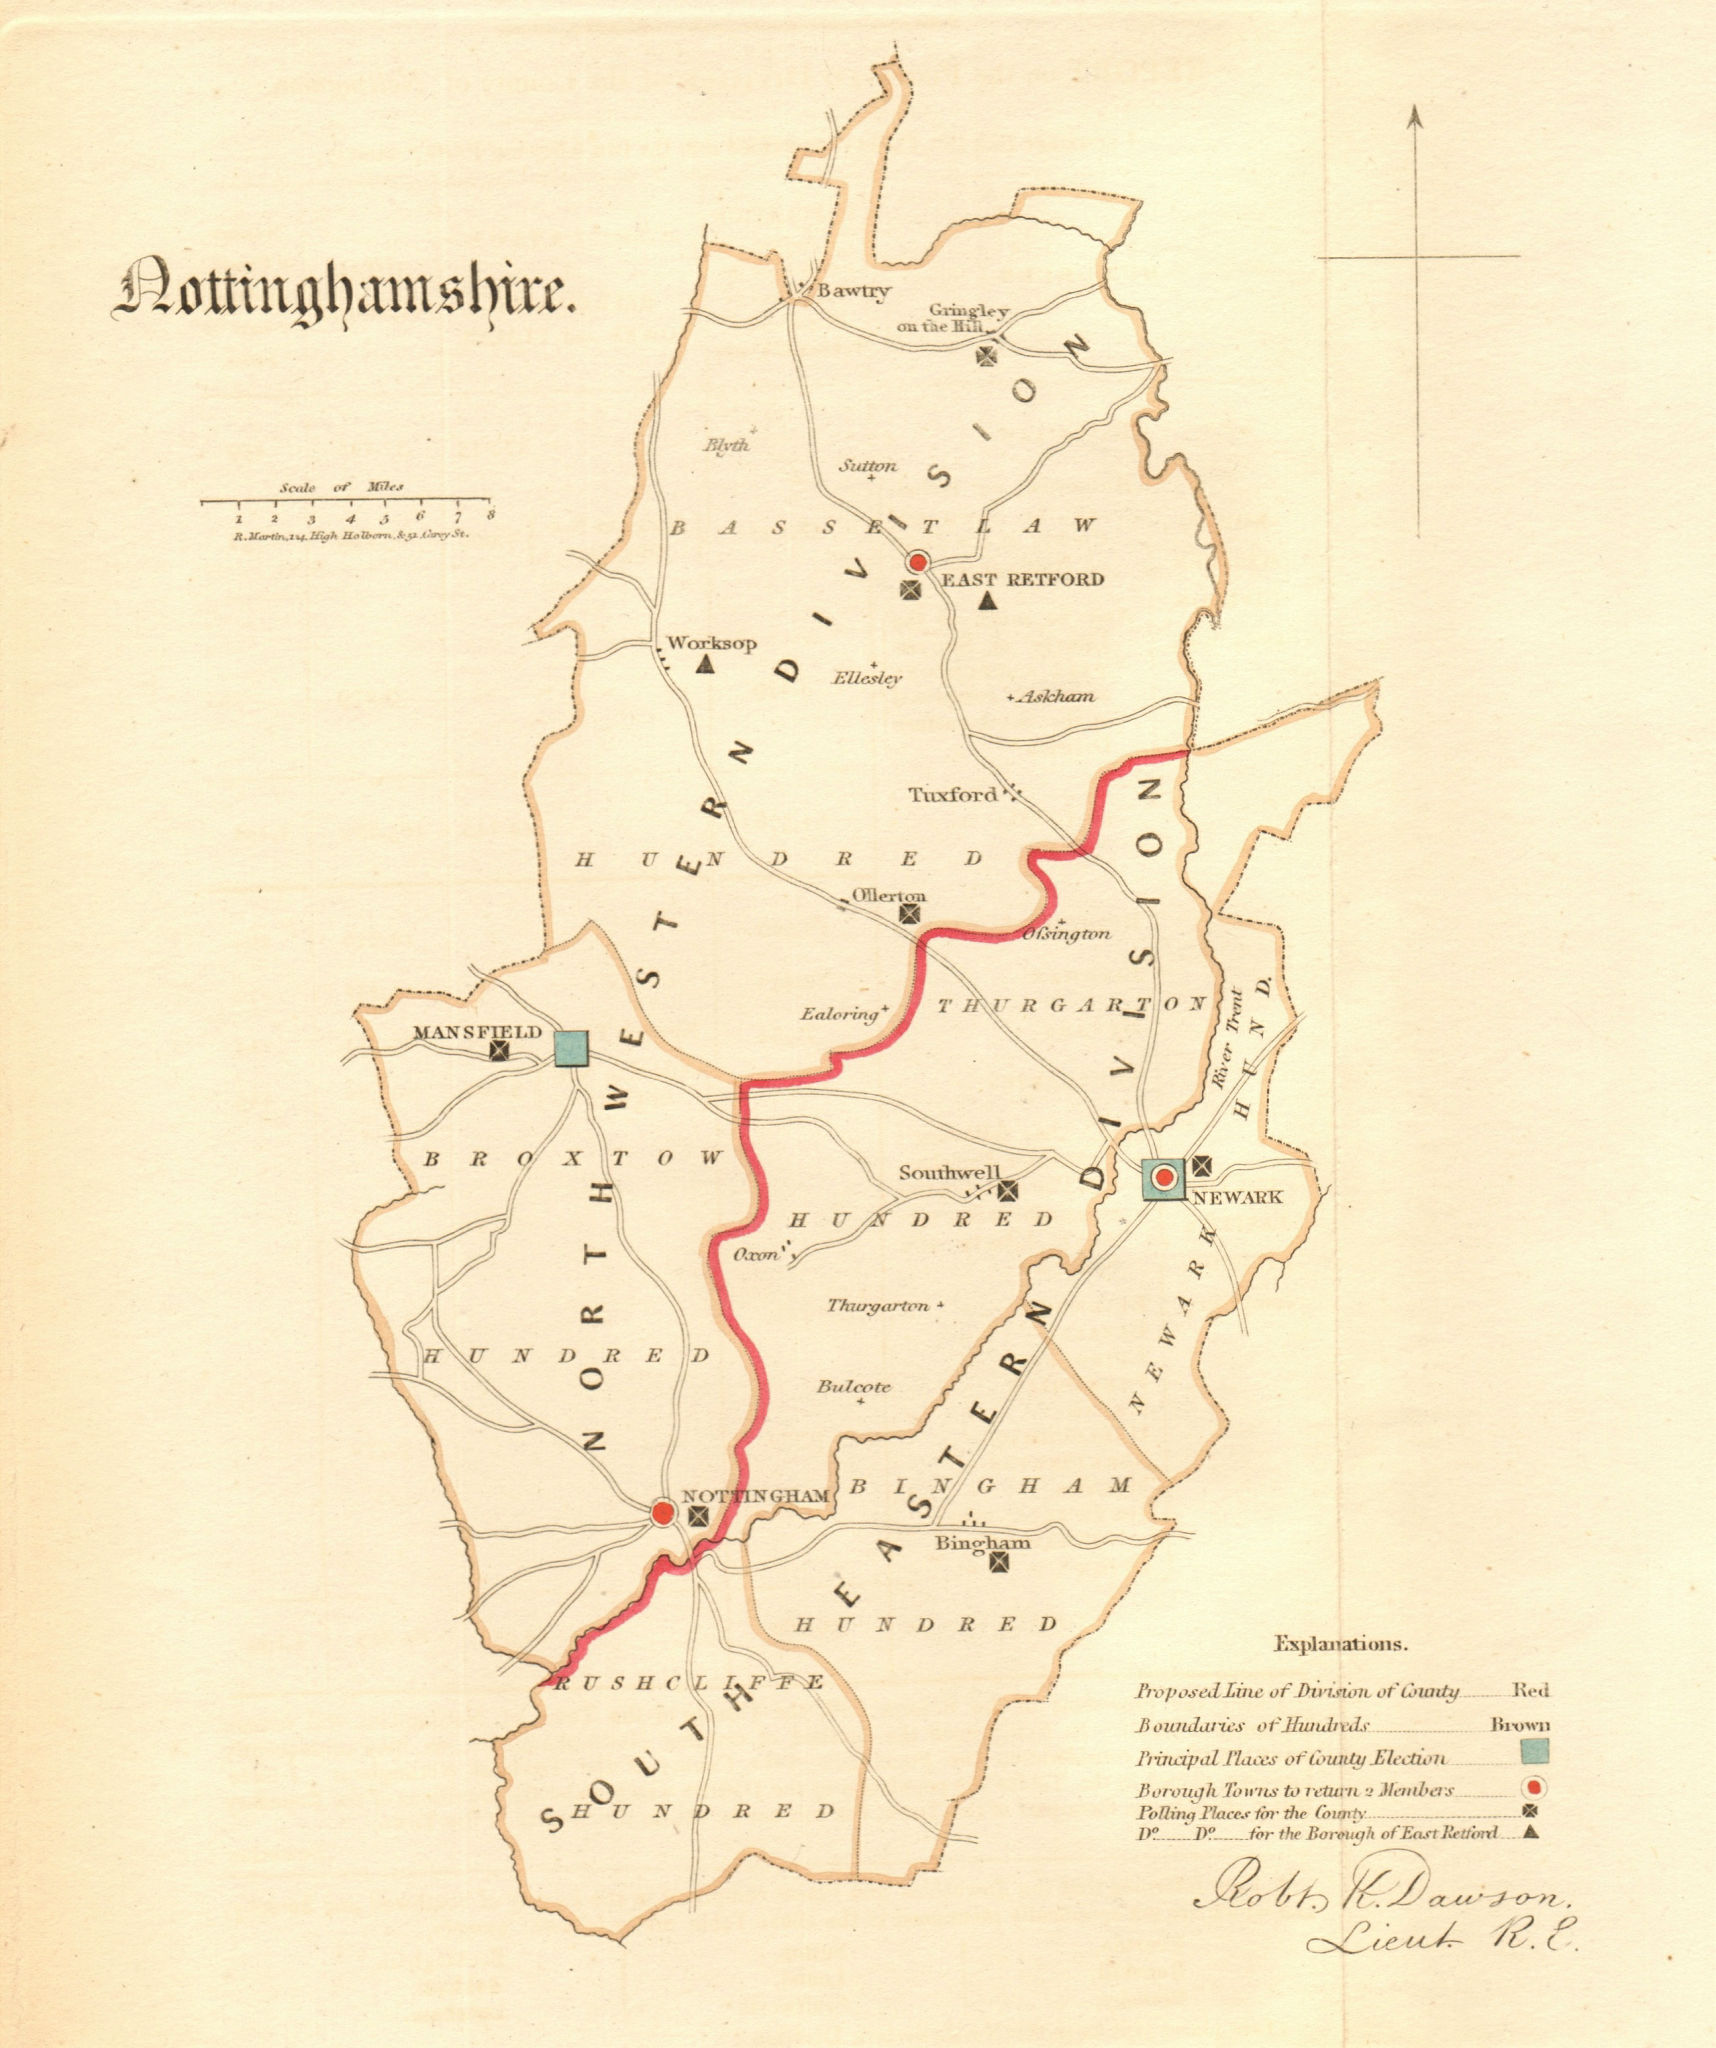 Nottinghamshire county map. Divisions boroughs electoral REFORM ACT. DAWSON 1832